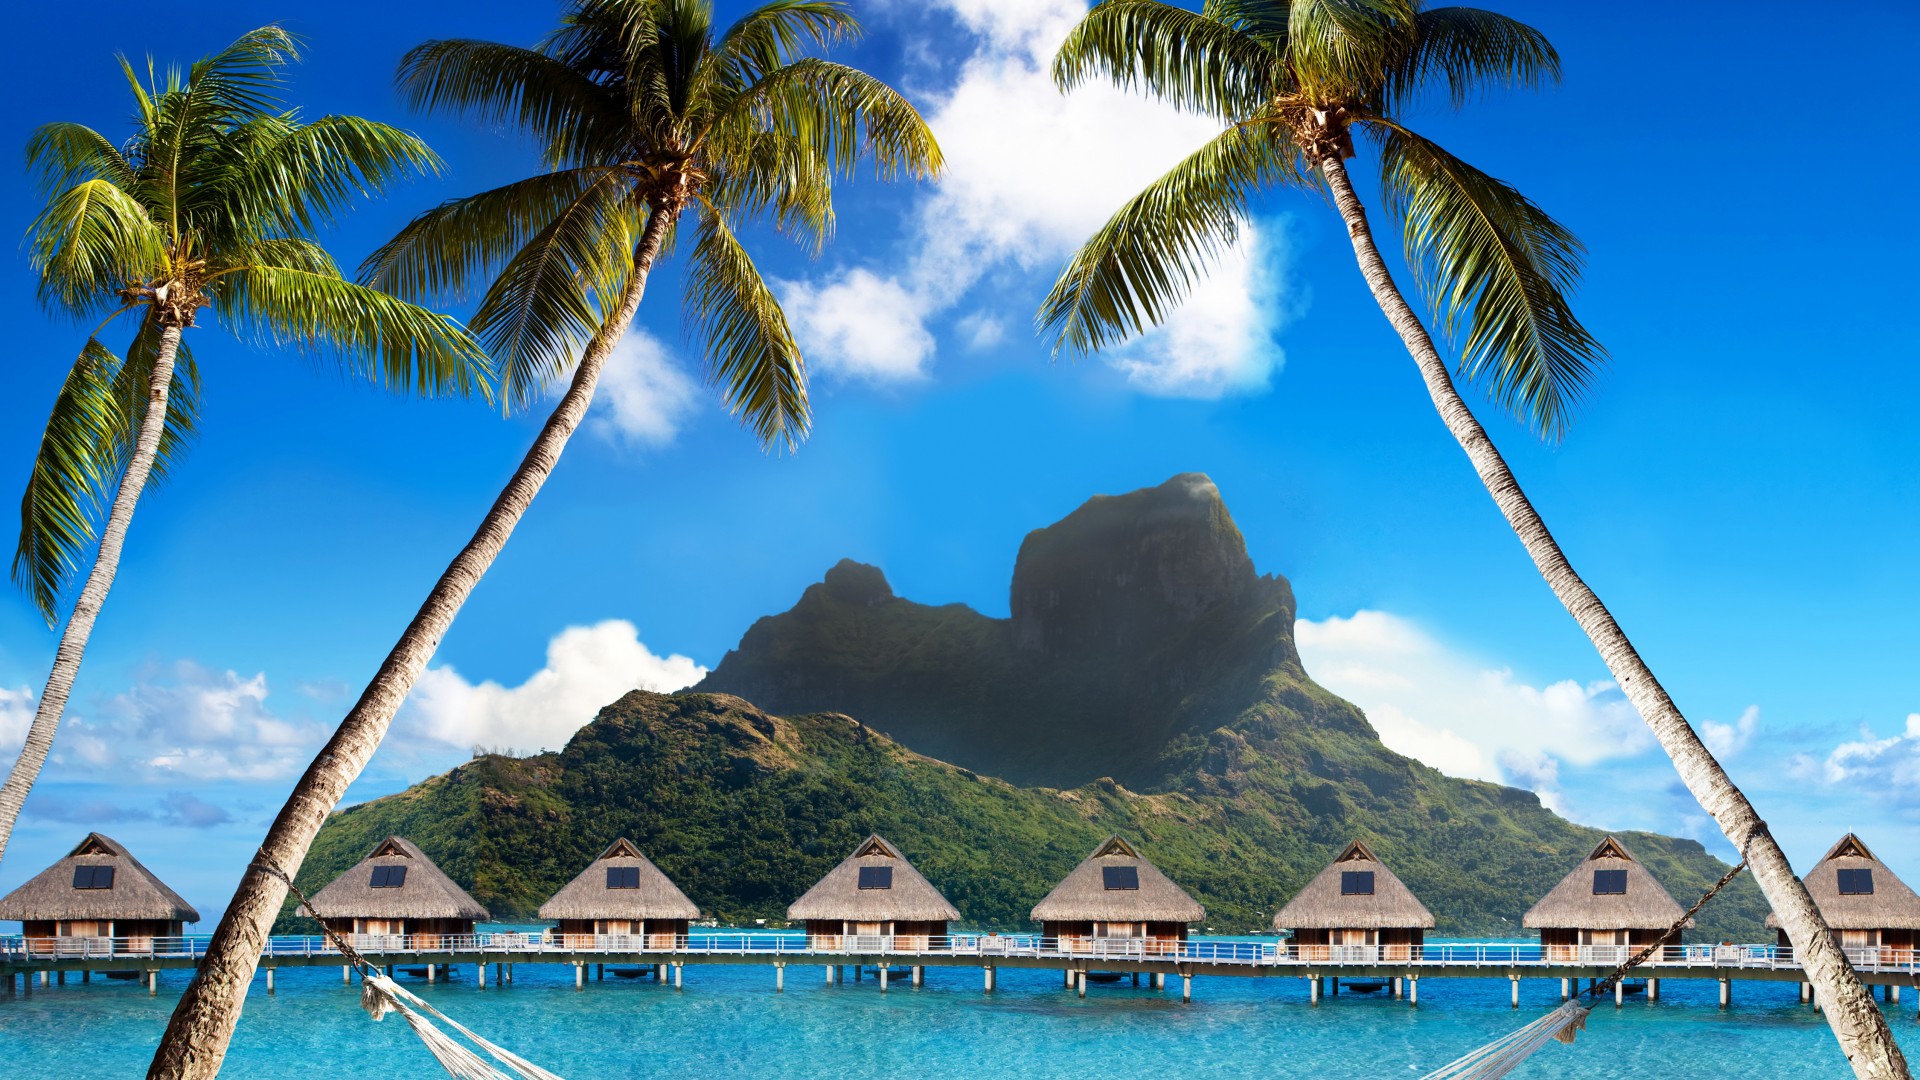 Bora Bora, 5k, 4k wallpaper, French Polynesia, Best beaches of 2017, Best Hotels of 2017, ocean, palm trees, mountains, beach, vacation, rest, travel, booking, palm trees, hammock (horizontal)